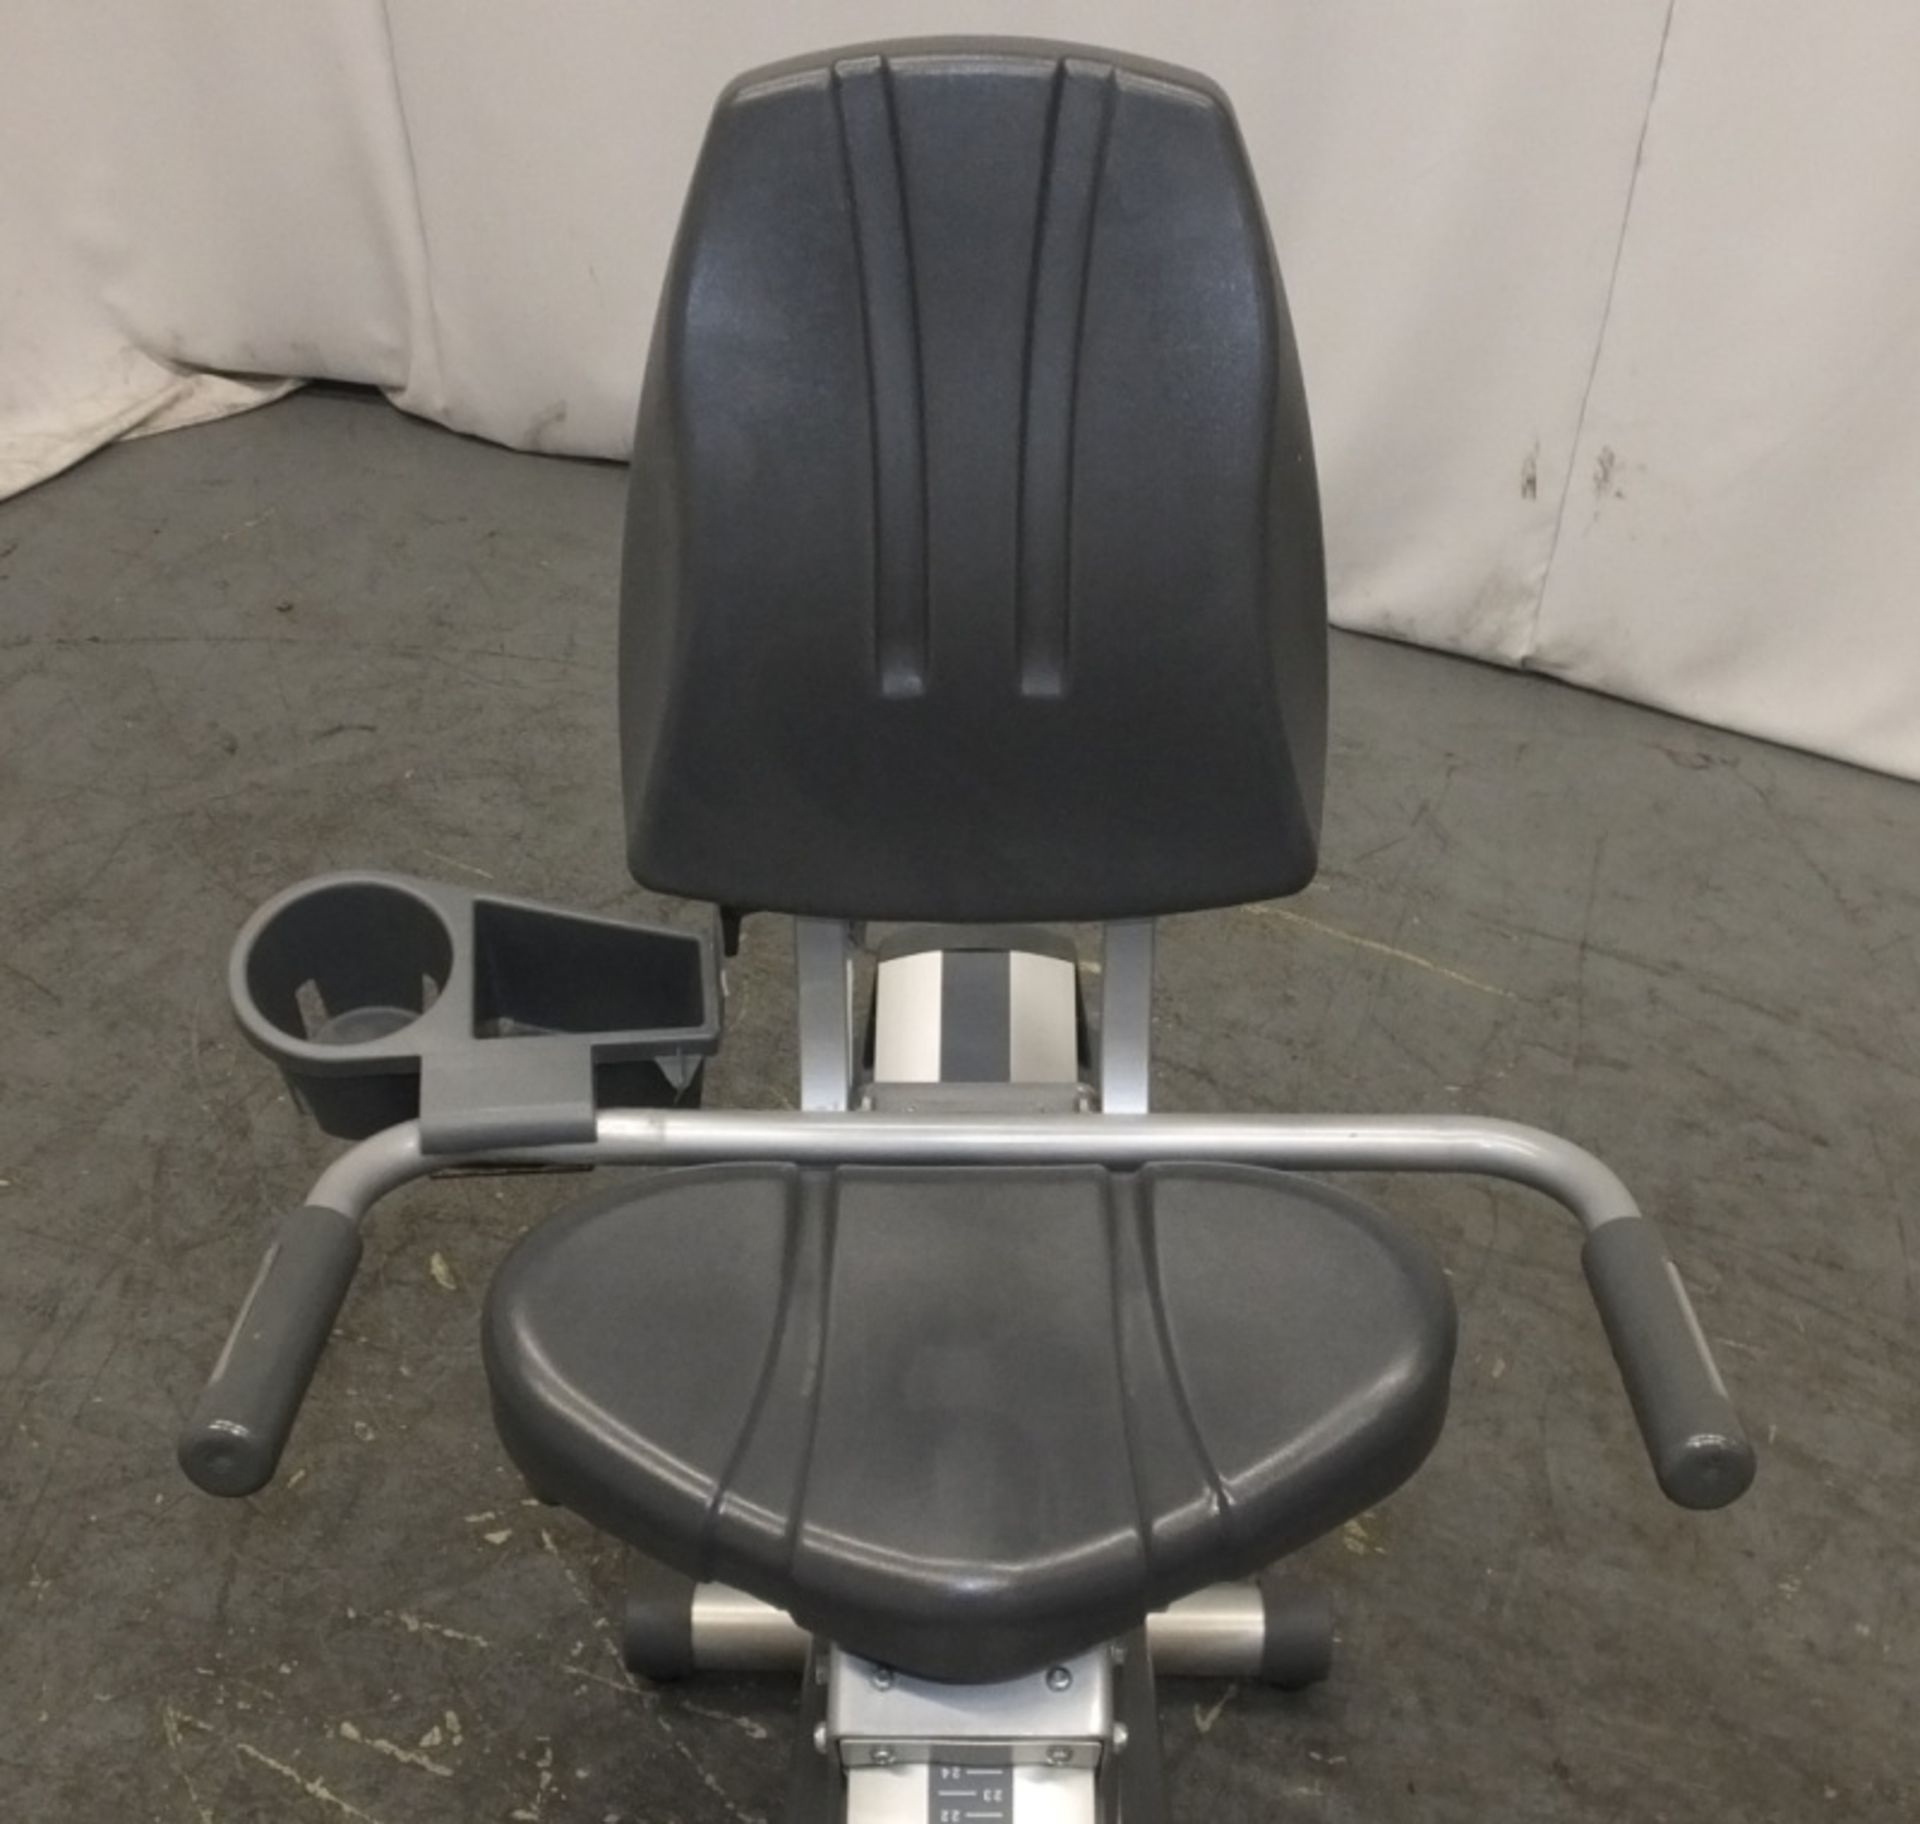 Life Fitness 95Ri Recumbent Exercise Bike - badly damaged display unit - Please check pictures - Image 7 of 14